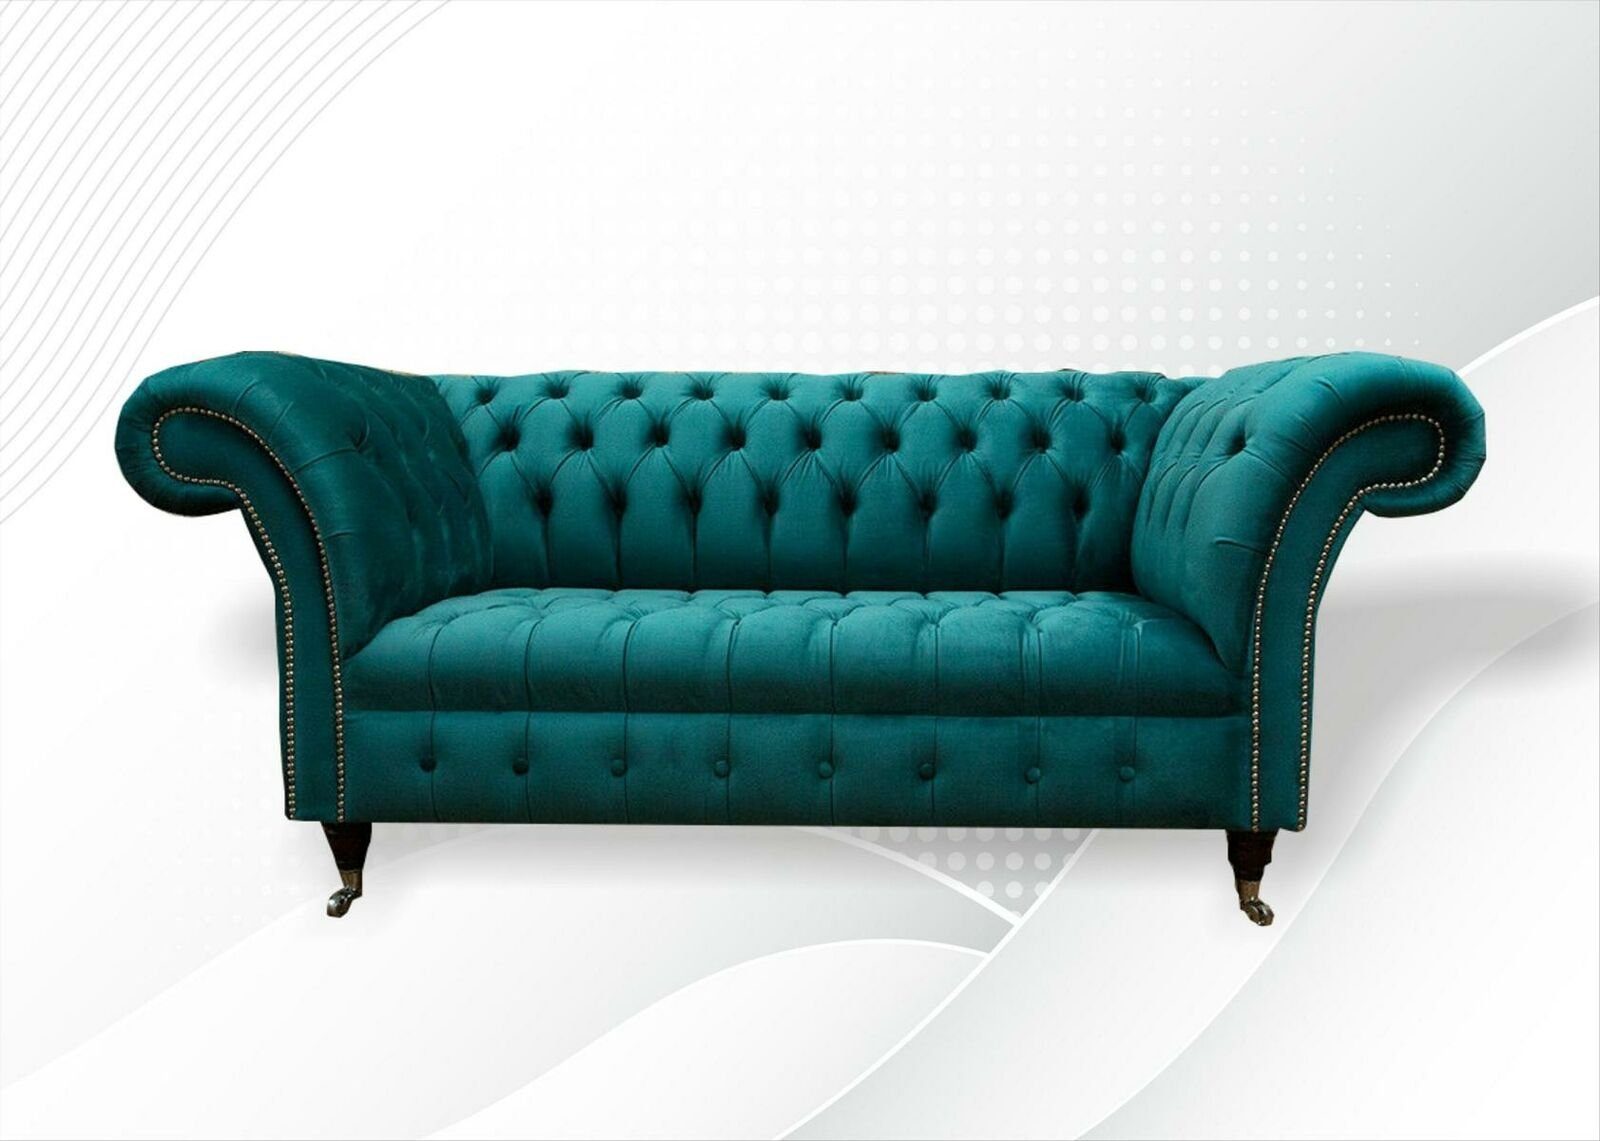 2 Sitzer JVmoebel Couch Sofas Polster Sofa Lounge Chesterfield-Sofa, Design Chesterfield Luxus